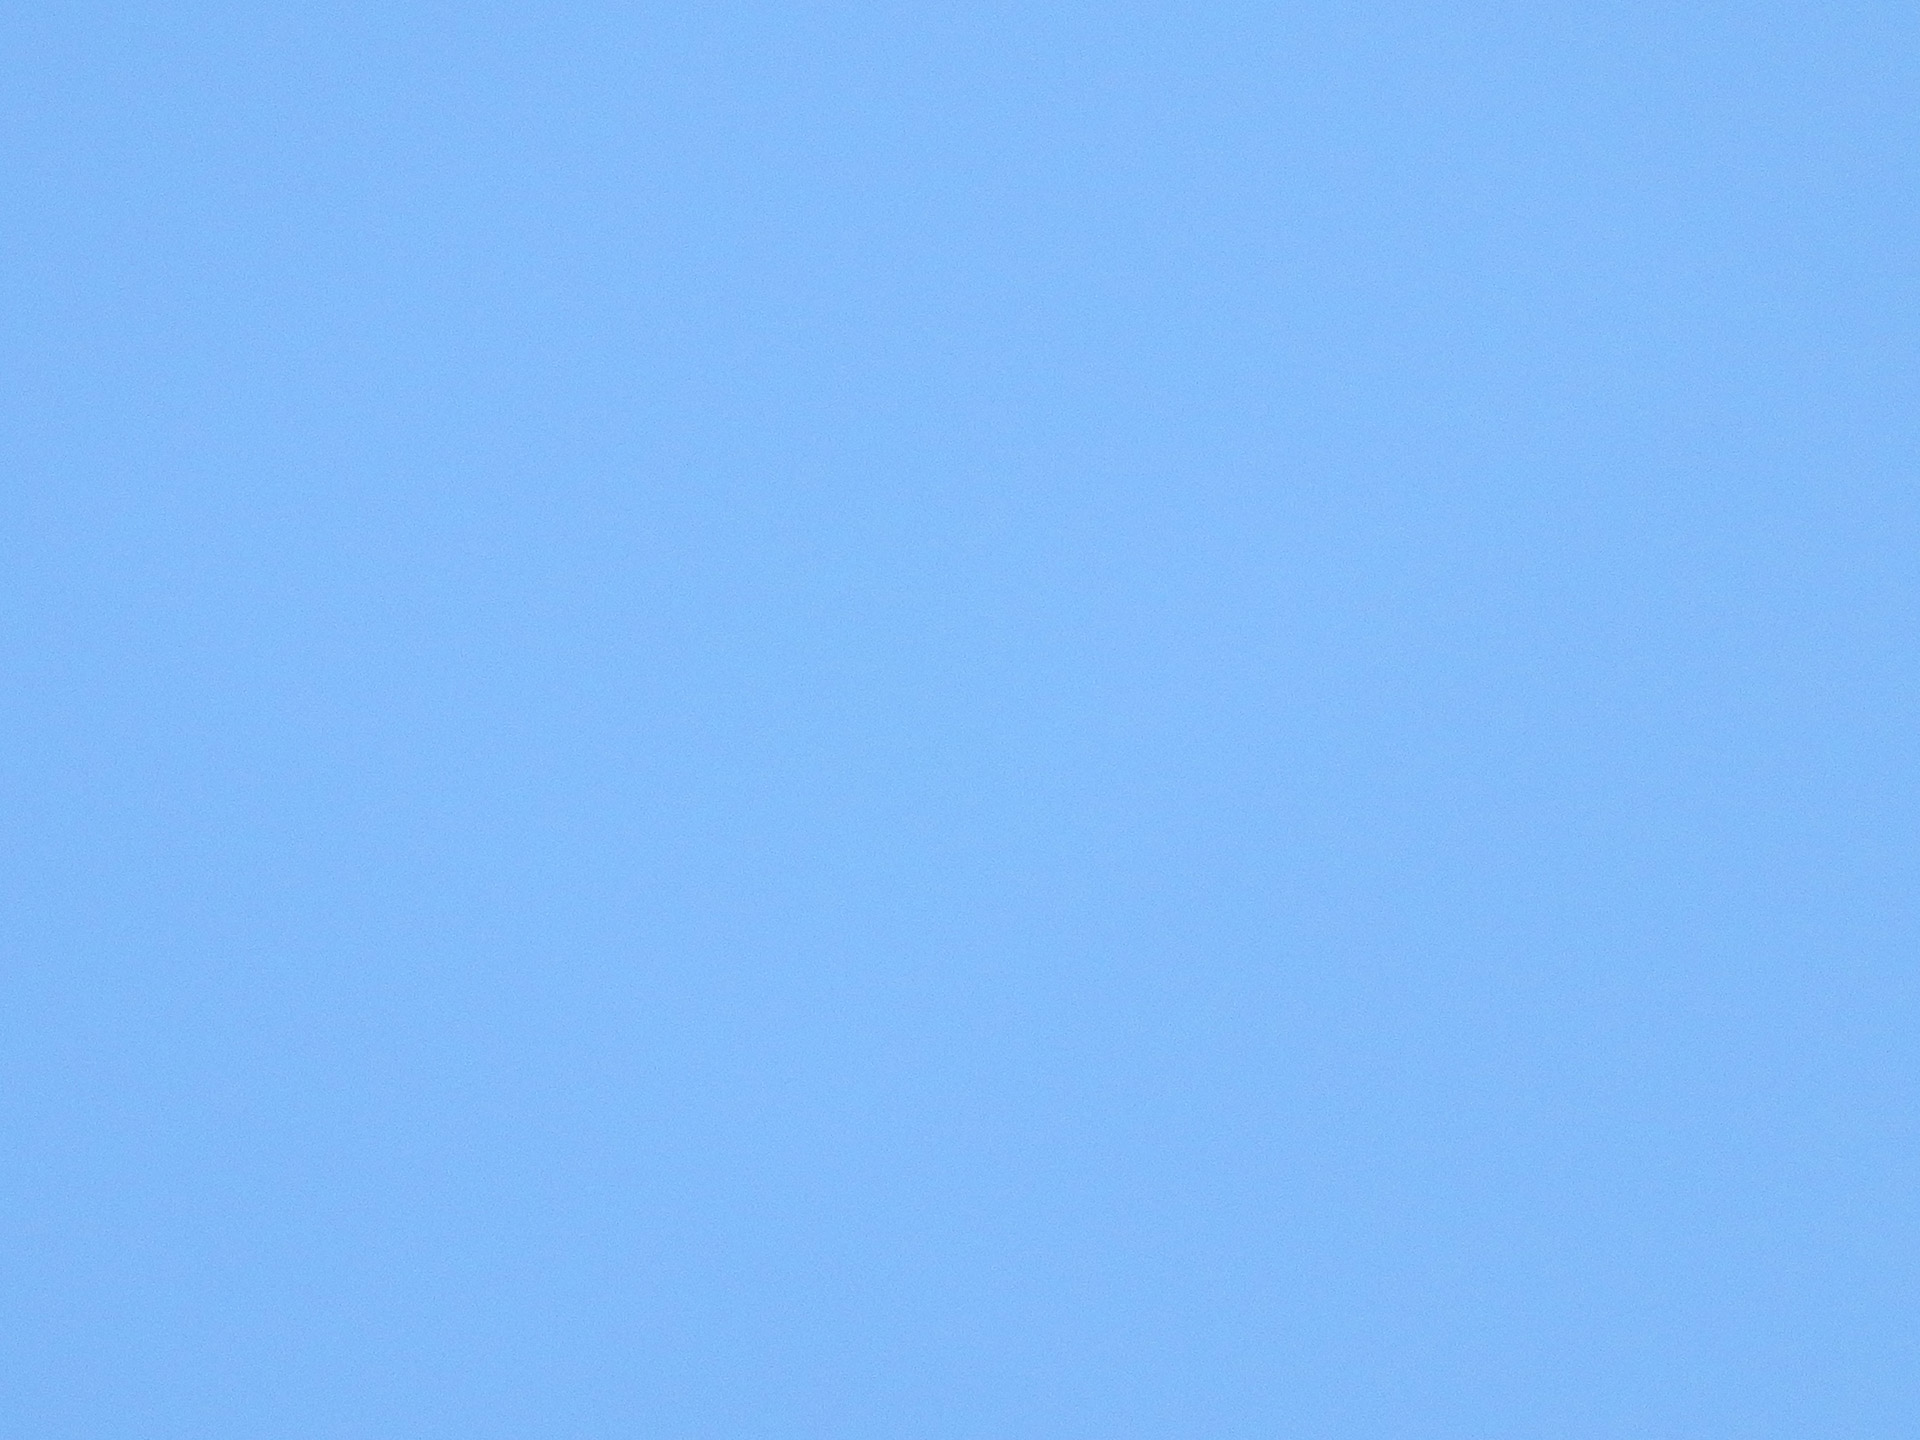 Download free photo of Sky,blue,color,colour,plain - from 